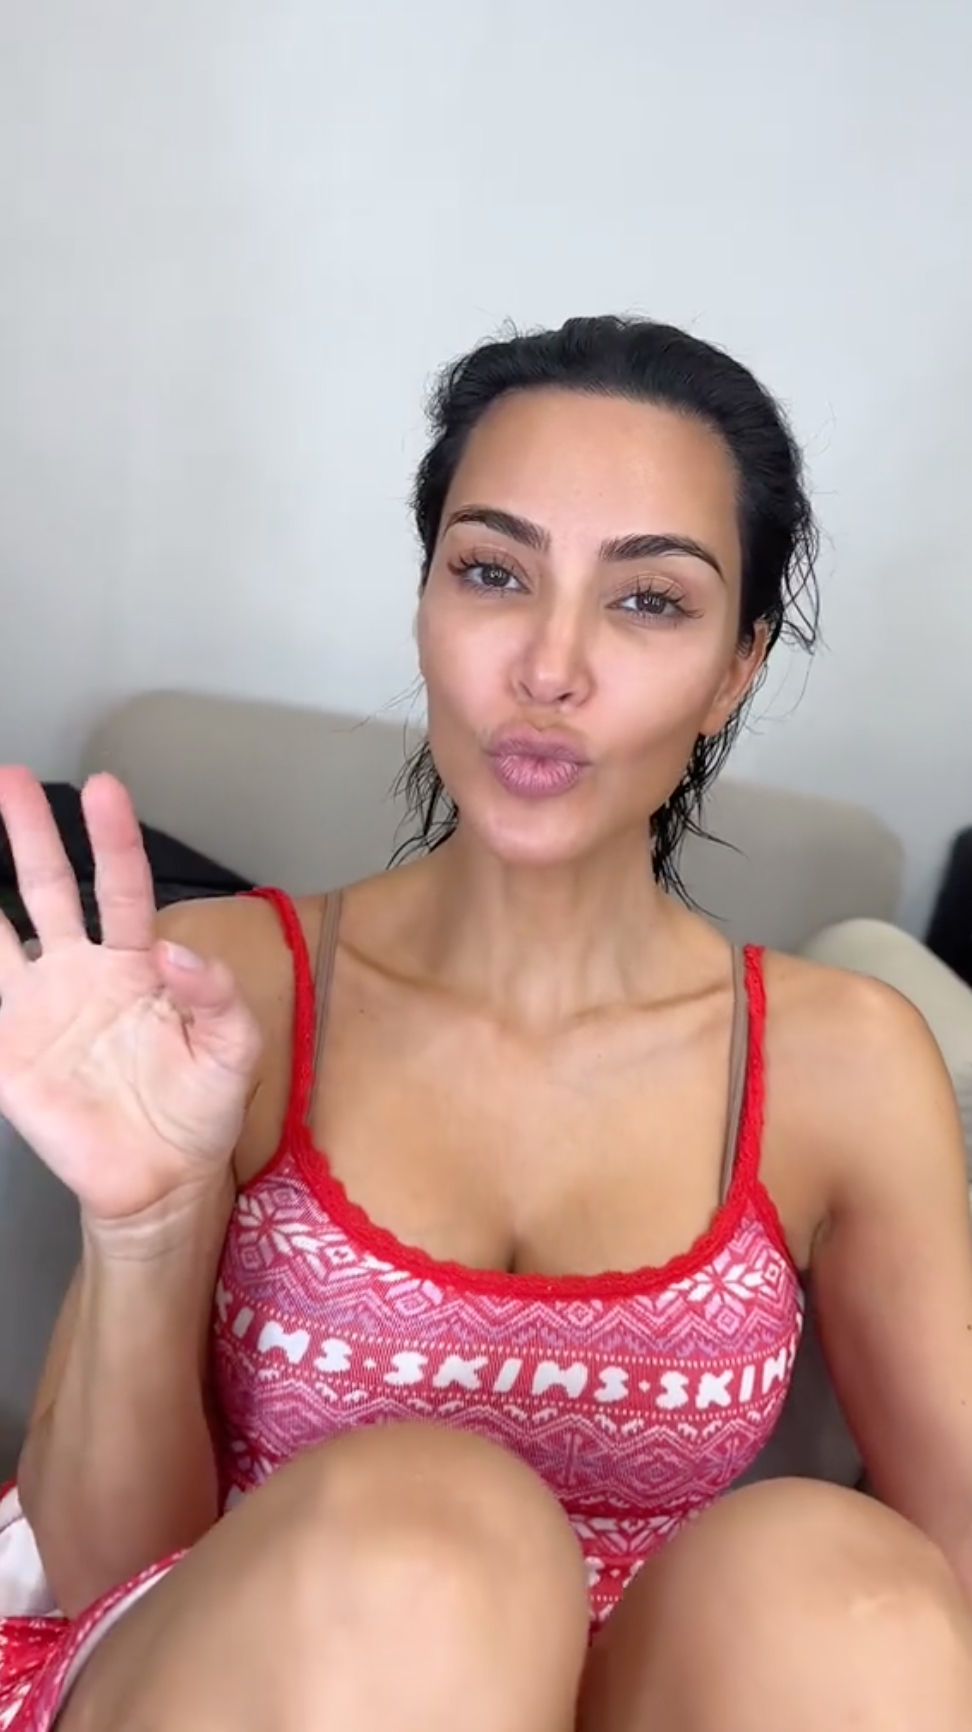 Last month, Kim shared a photo of herself make-up free on social media